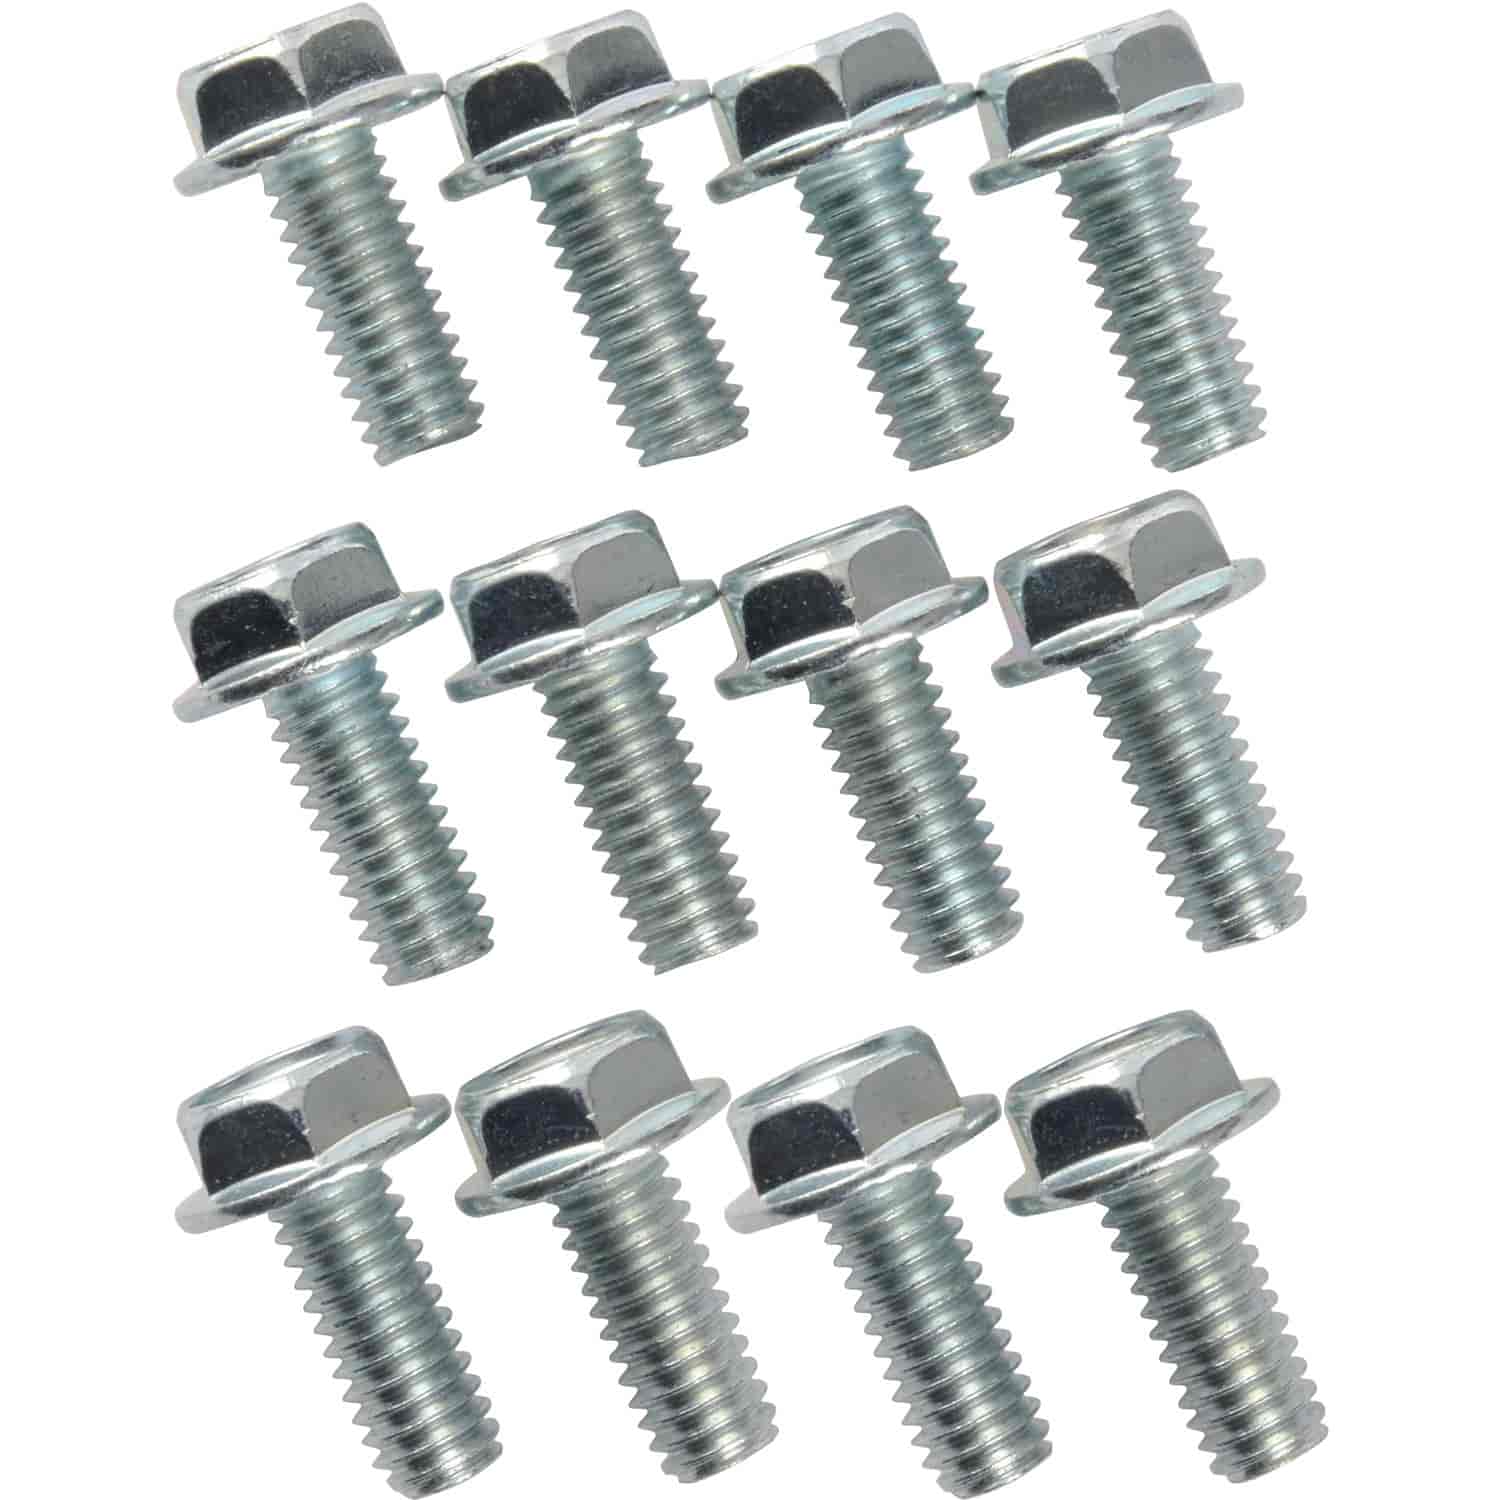 Zinc-Plated Differential Cover Bolts 5/16"-18 x 3/4"